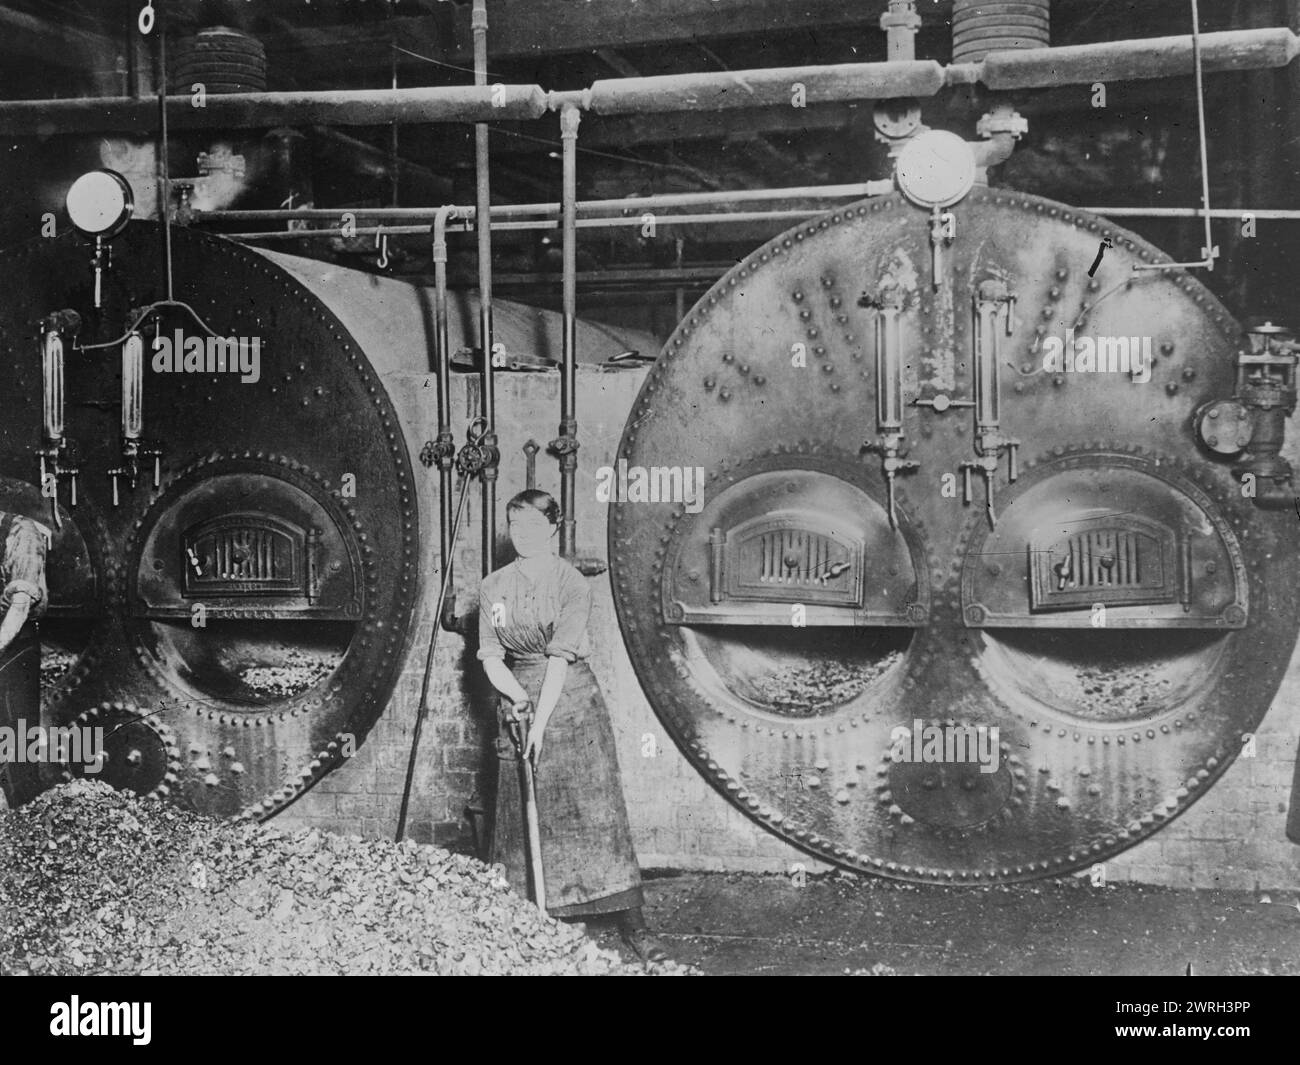 English furnace woman in iron works, between c1915 and 1917. A woman stoker England in front of a furnace at an ironworks during World War I. Stock Photo